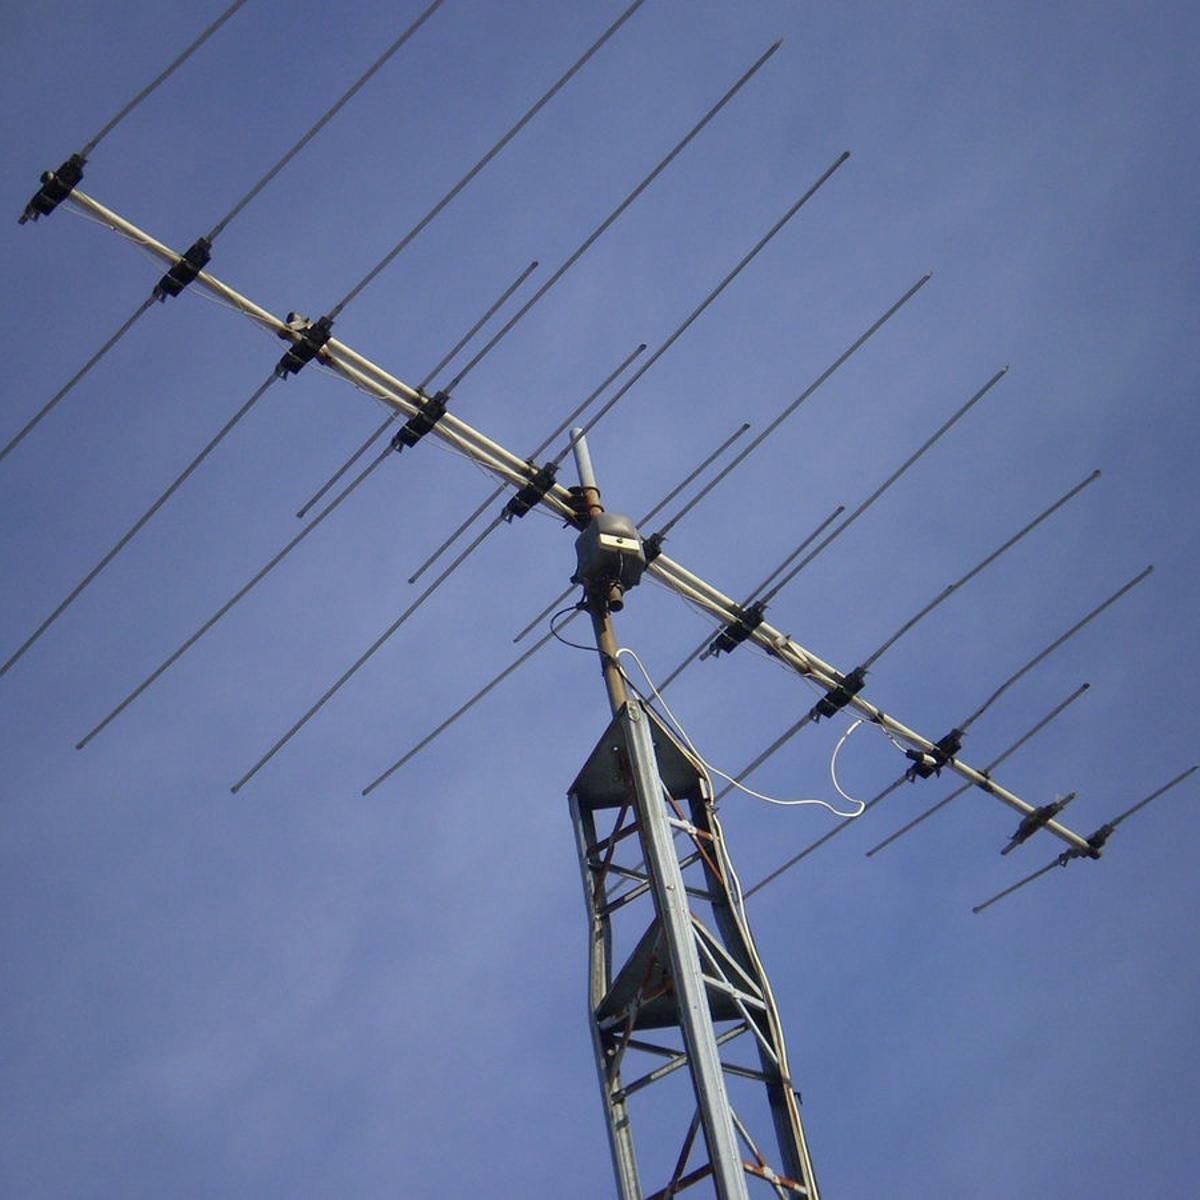 Frequency changes affecting TV antenna users | Local News | kenoshanews.com